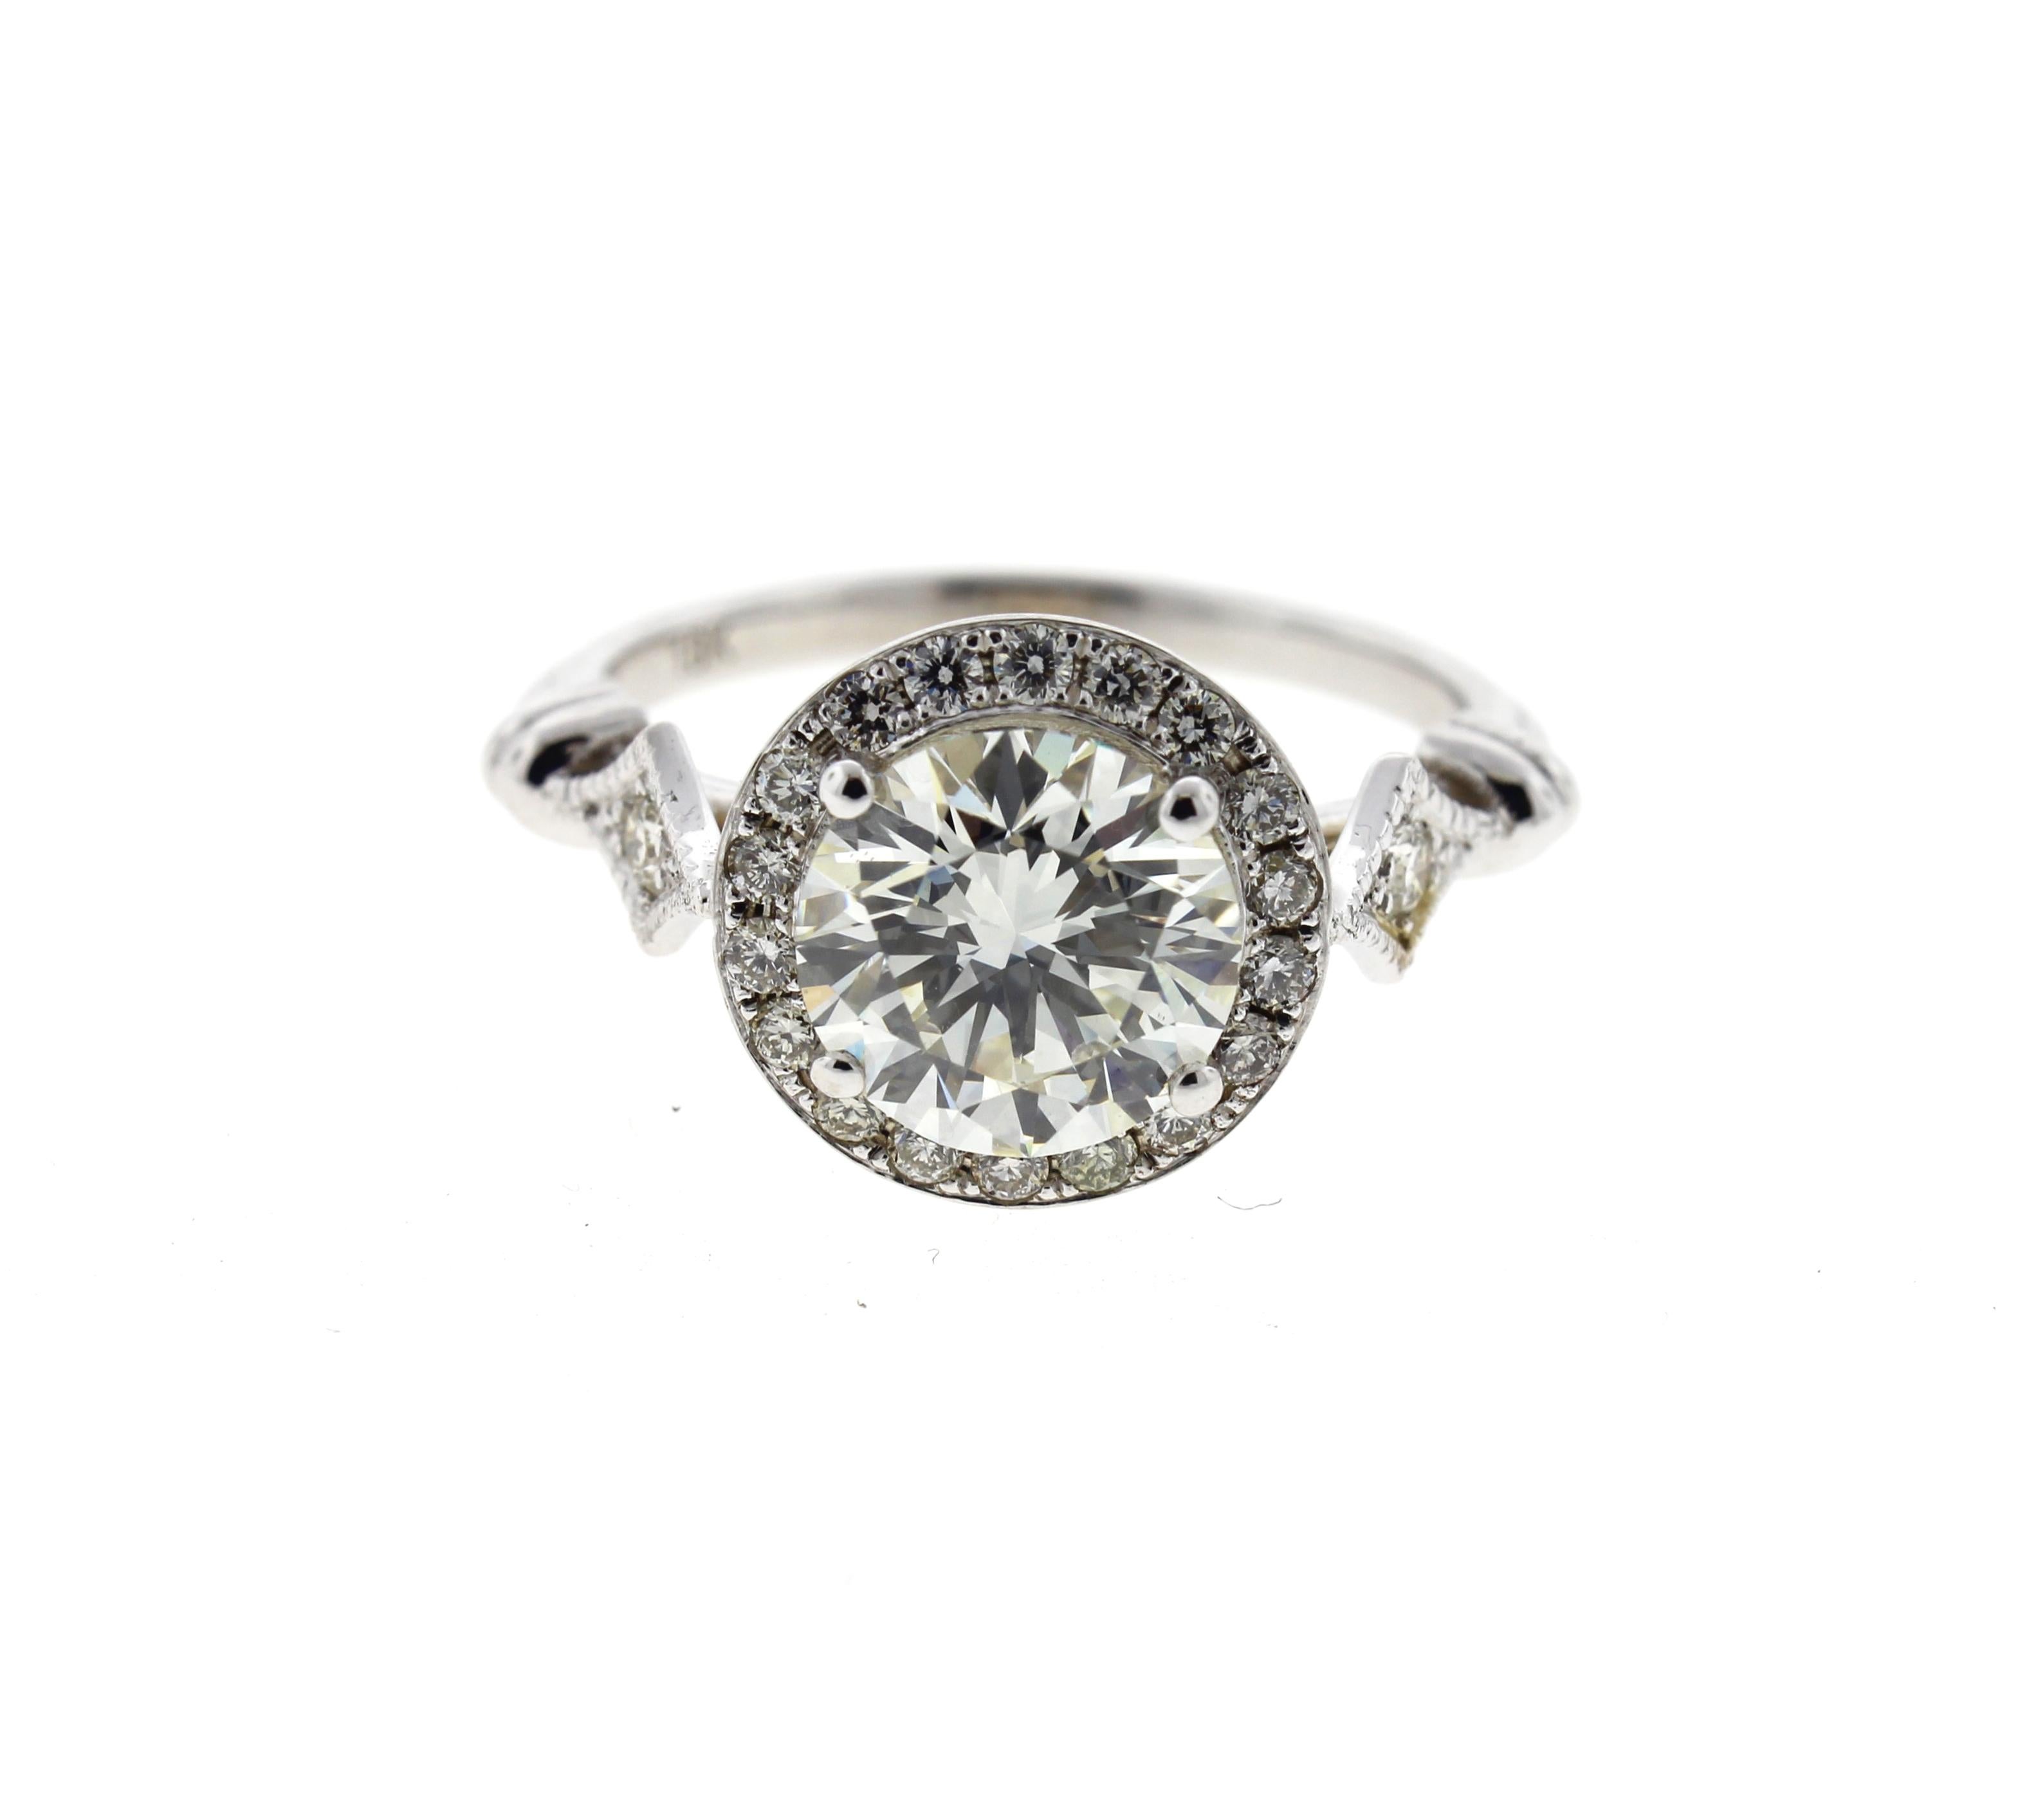 This Edwardian style diamond engagement ring is crafted in 14k white gold, and contains a Round Brilliant Cut Diamond (0.61 carat, F Color, SI1 Clarity) and is surrounded by 28 Round Brilliant Cut diamonds (0.14 total carat weight, F Color, SI